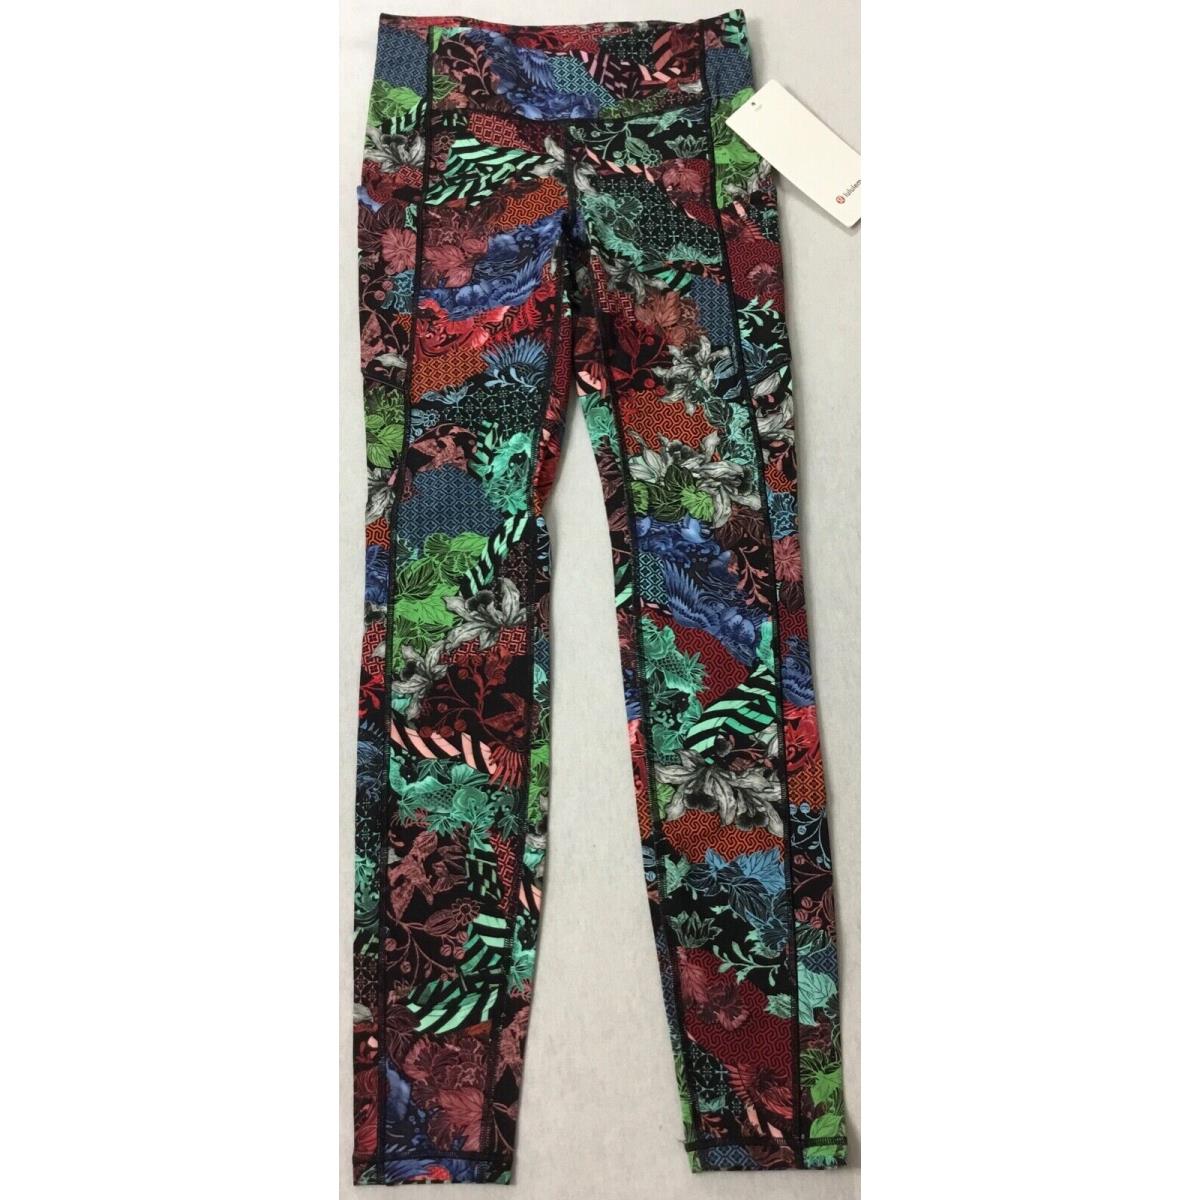 Lululemon Women Speed Up Tight 28 Luxtreme LW5AUYS Zcml Floral Print Size 4